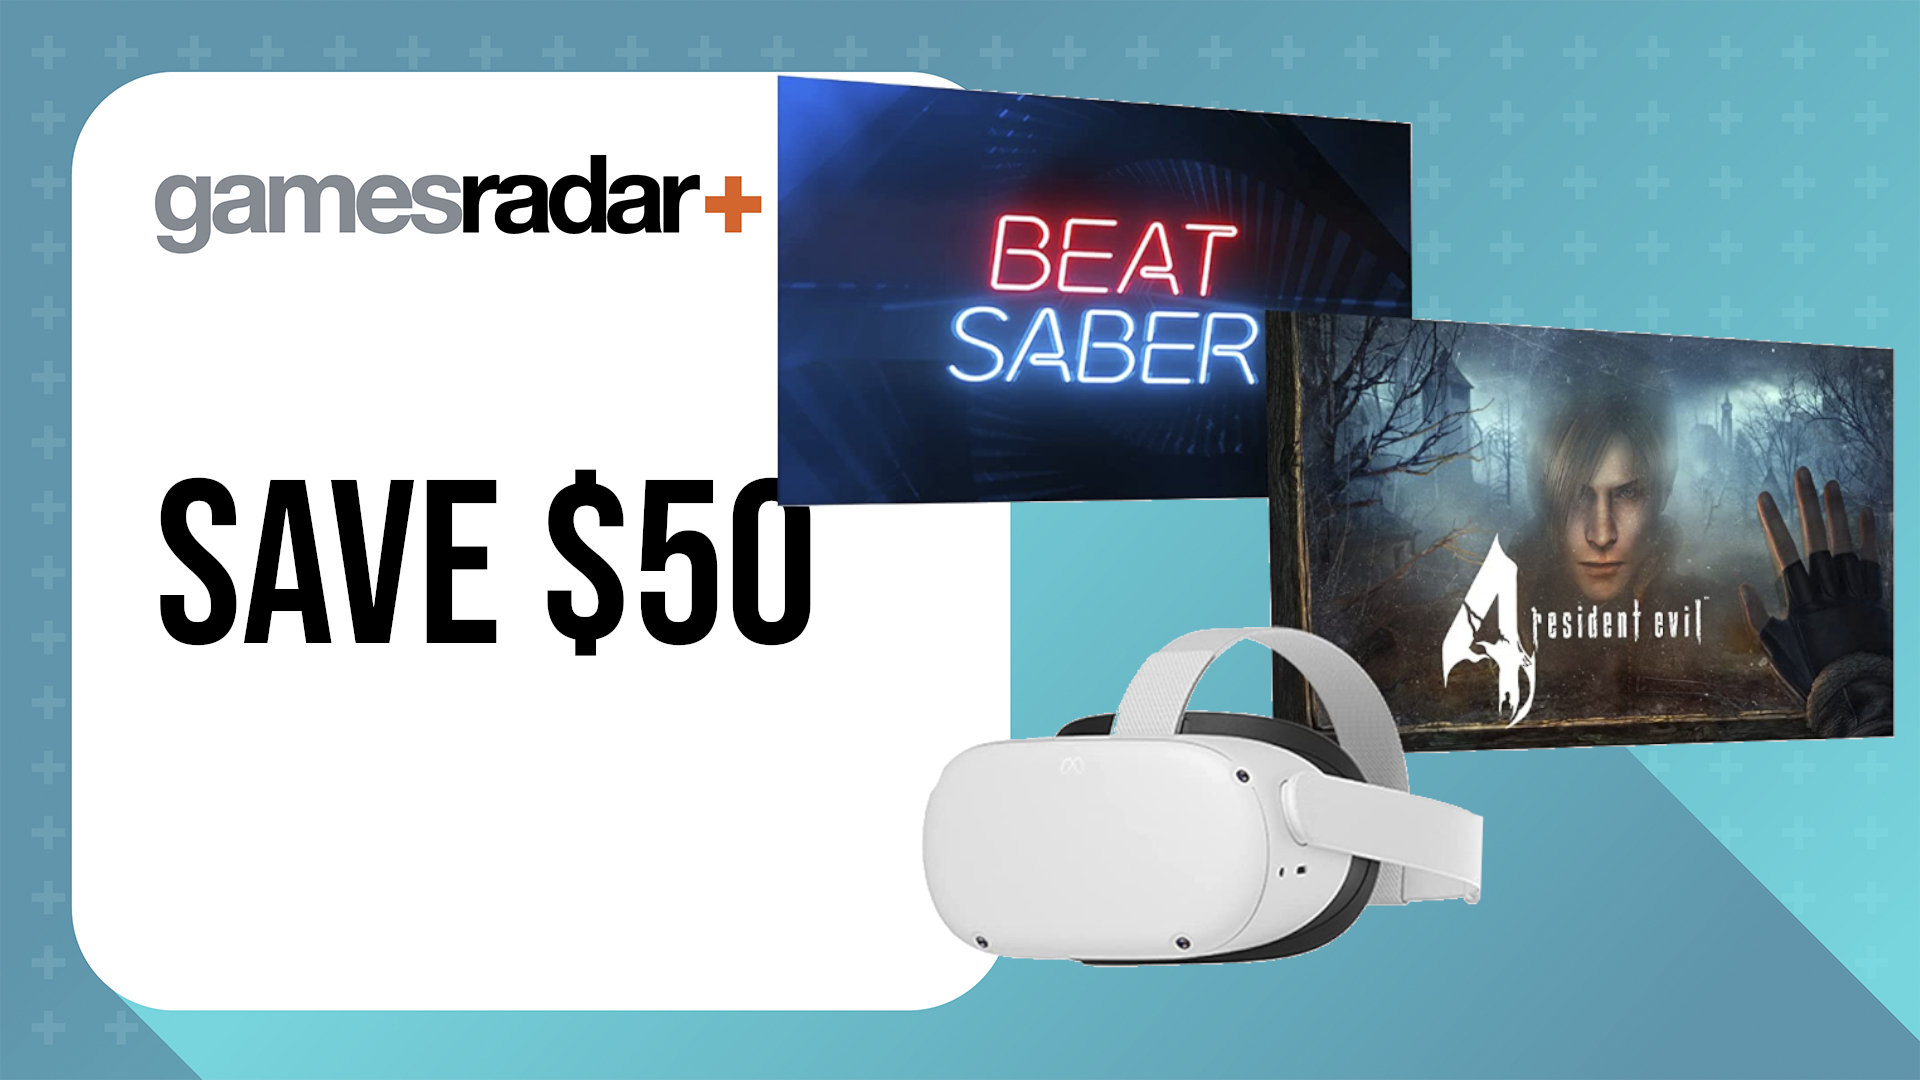 Black Friday Oculus Quest 2 deals with Beat Saber and Resident Evil 4